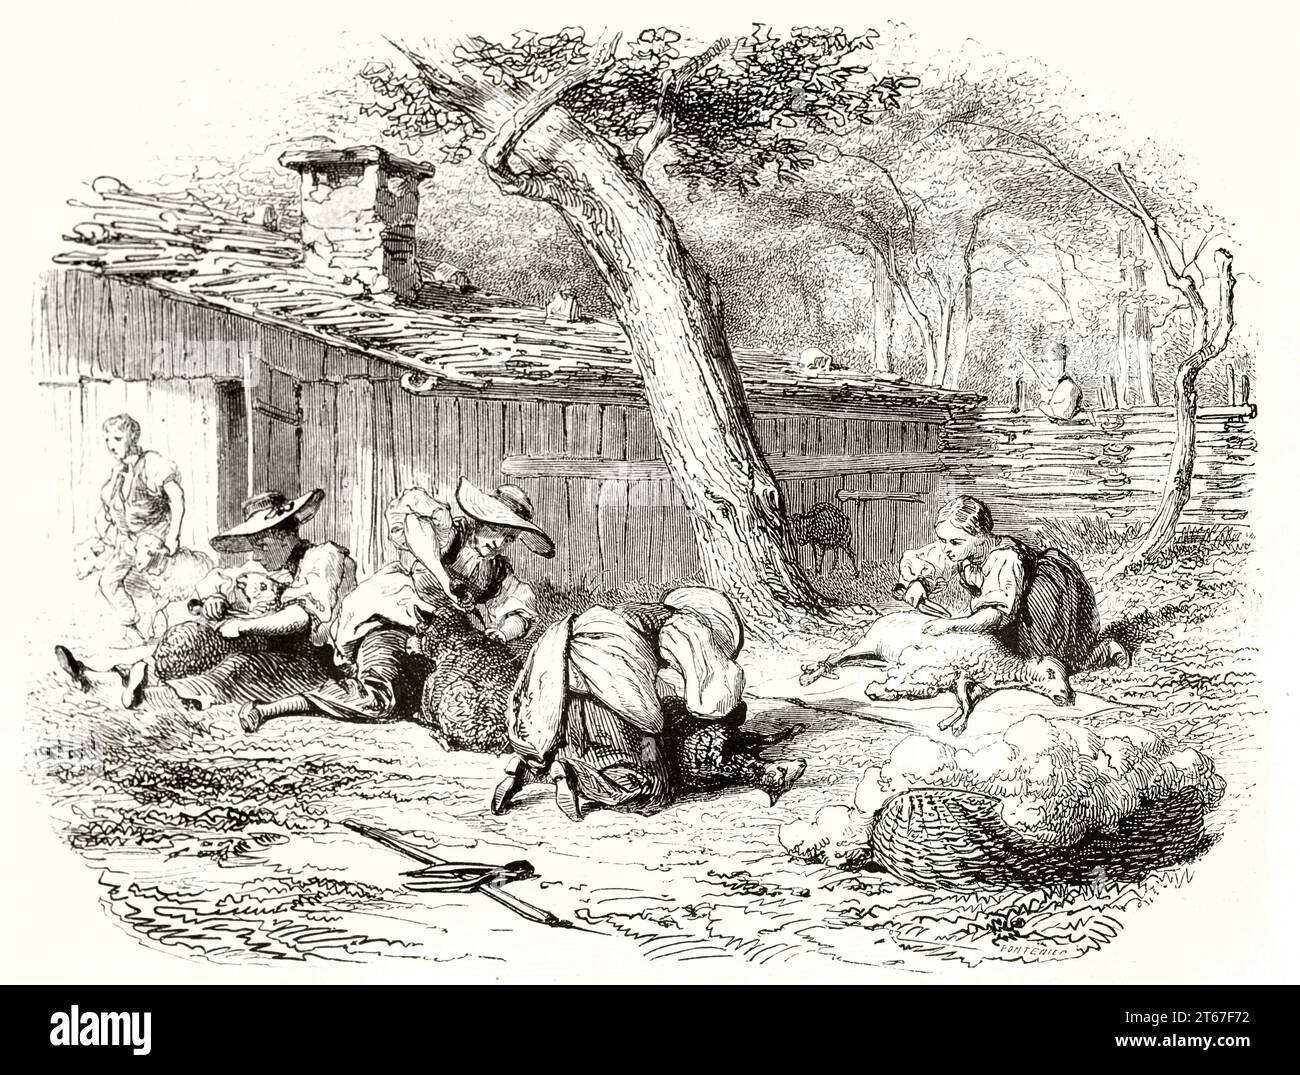 Old illustration of women shearing sheeps. By Girardet, publ. on Magasin Pittoresque, Paris, 1851 Stock Photo